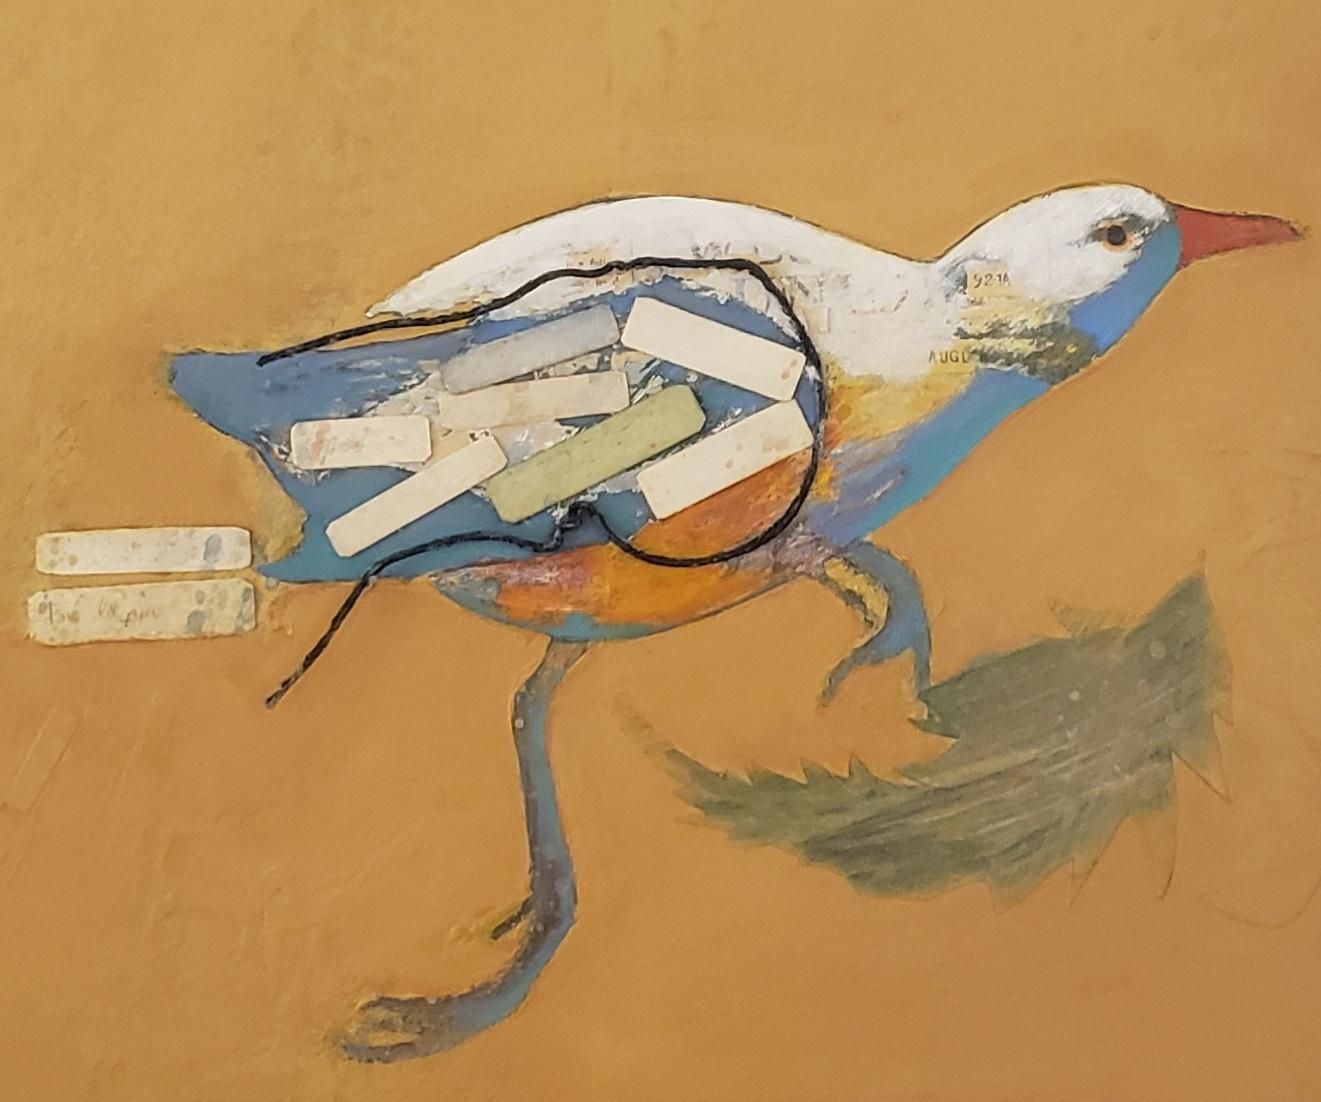  Santa Fe Bird , Southwest, 22 x 25Framed, Whimsical, Mixed Media, Oil - Painting by Anne Embree